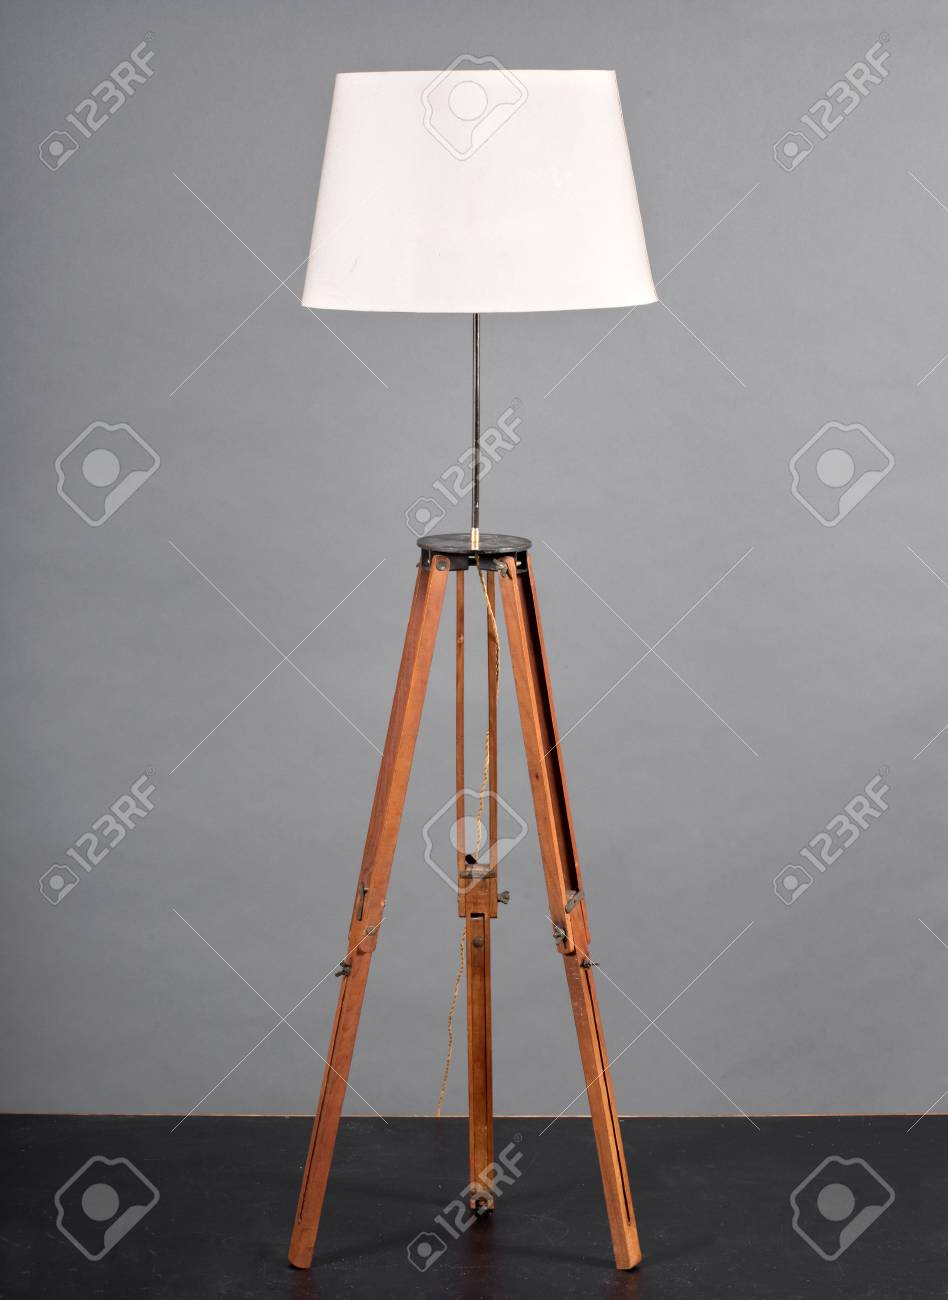 Vintage Wooden Tripod Floor Lamp With White Shade Against Grey regarding size 948 X 1300